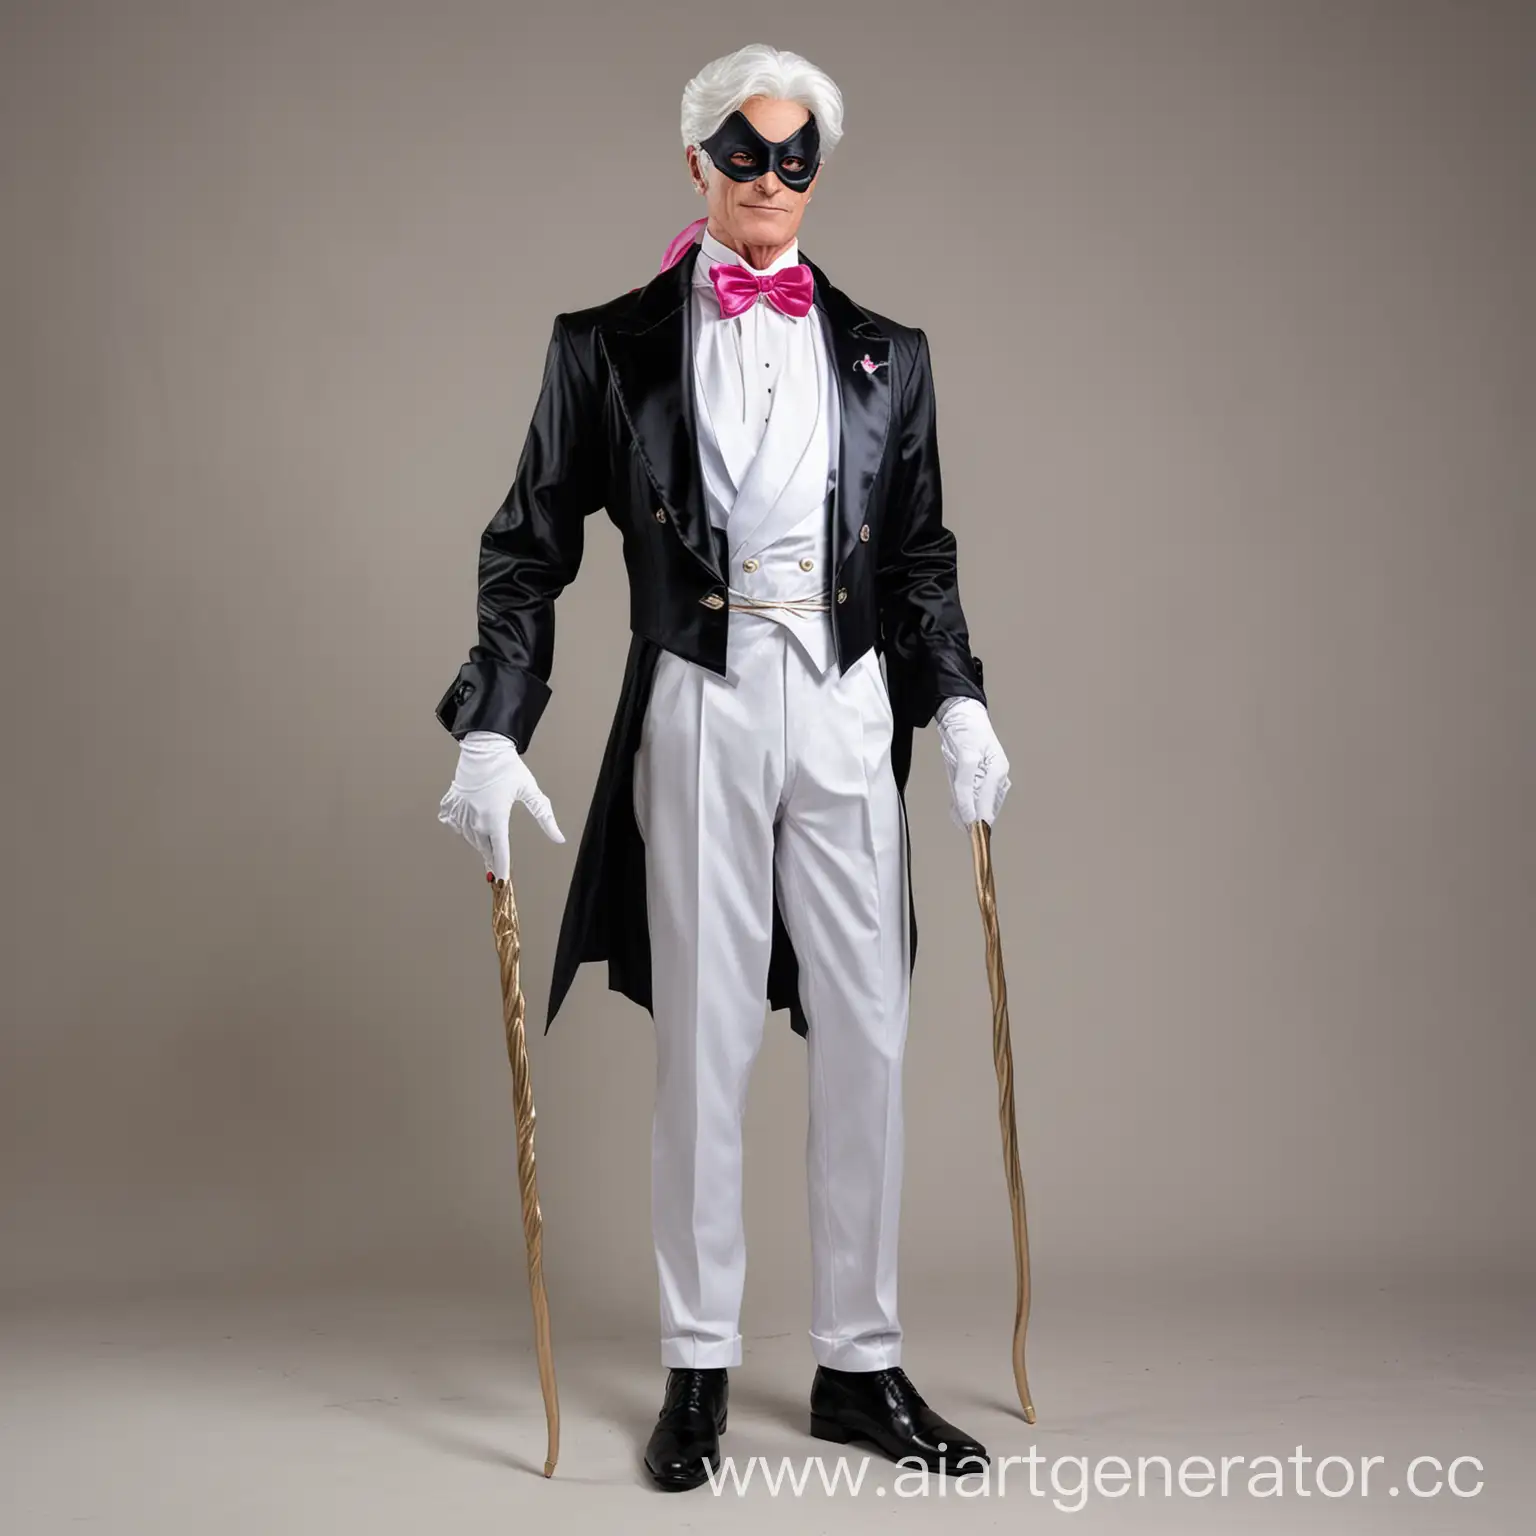 Elderly-Tuxedo-Mask-Poses-with-Cane-in-Sailor-Moon-Style